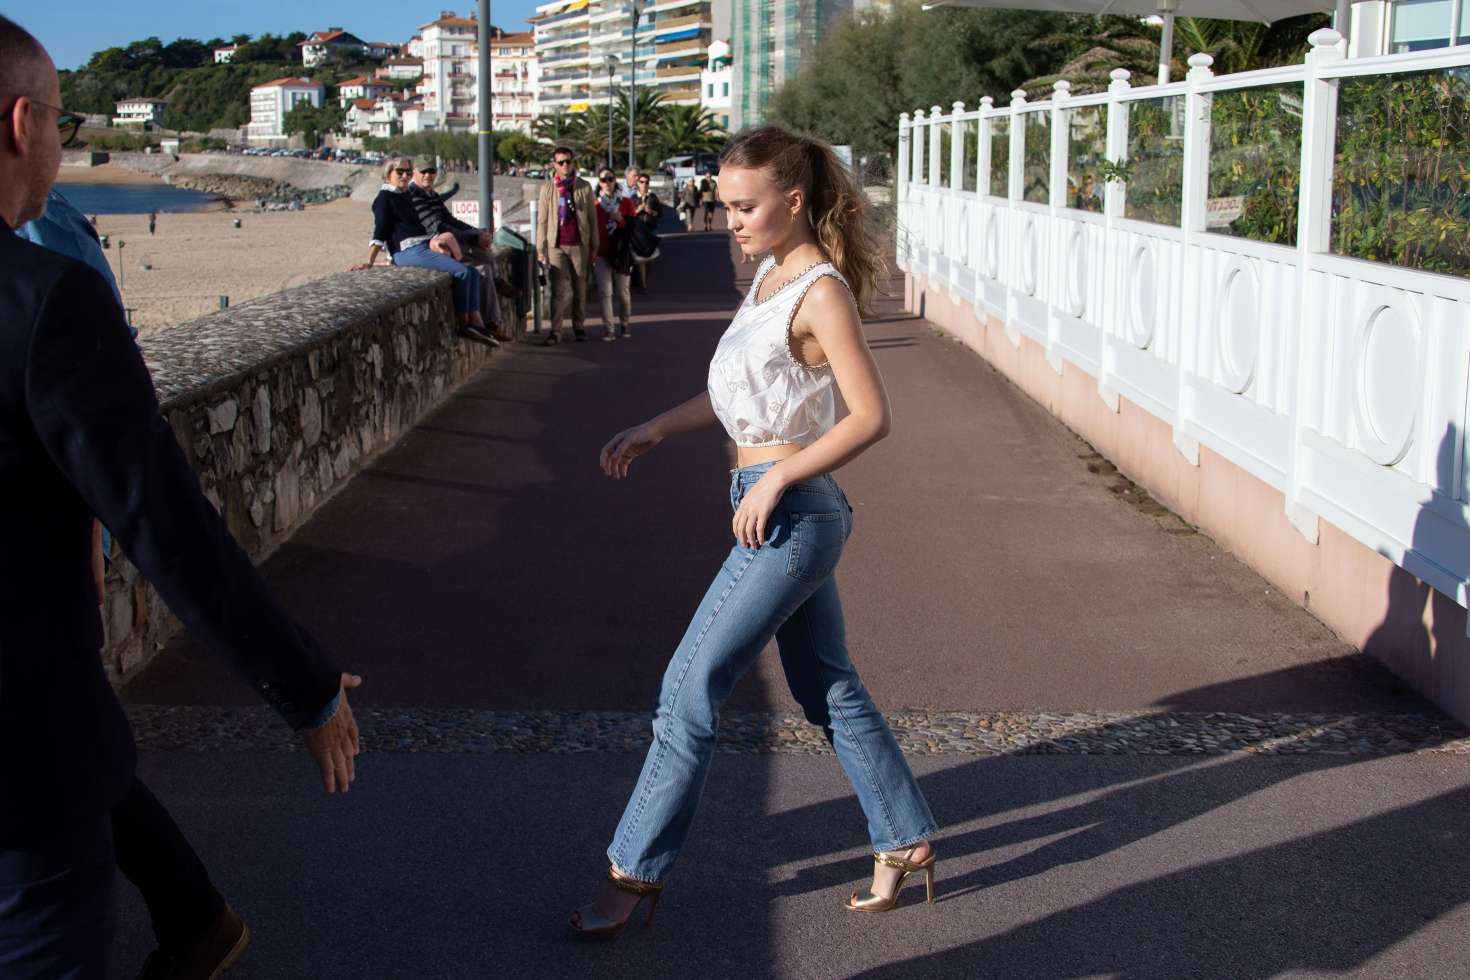 Lily Rose Depp in White Top and Jeans at 5th International Film Festival of St Jean de Luz